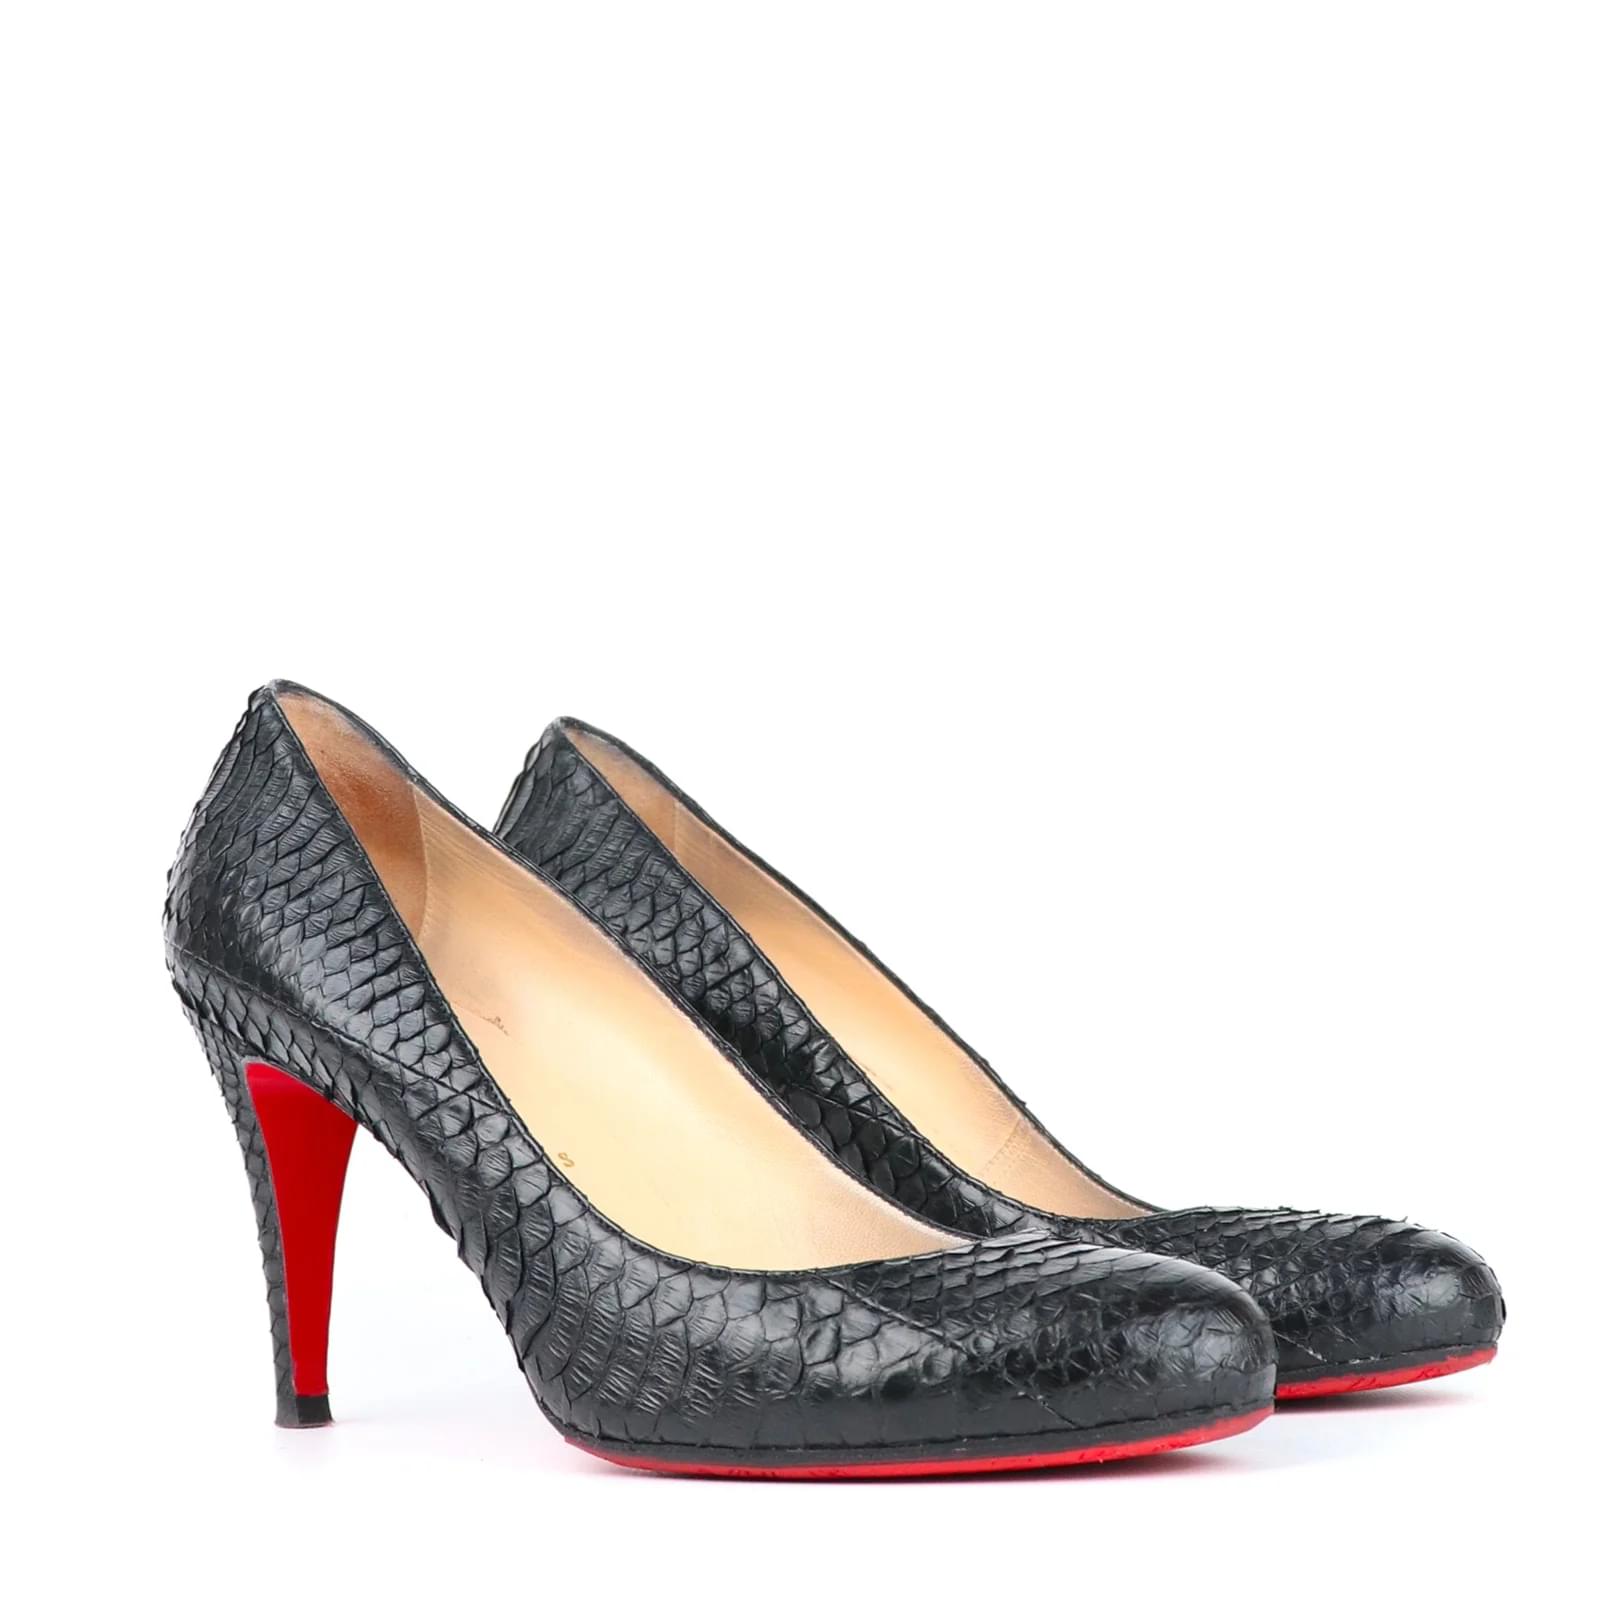 Clear Sole Protector for Heels - Protect your Christian Louboutin - 3M  Sticker : Amazon.in: Fashion